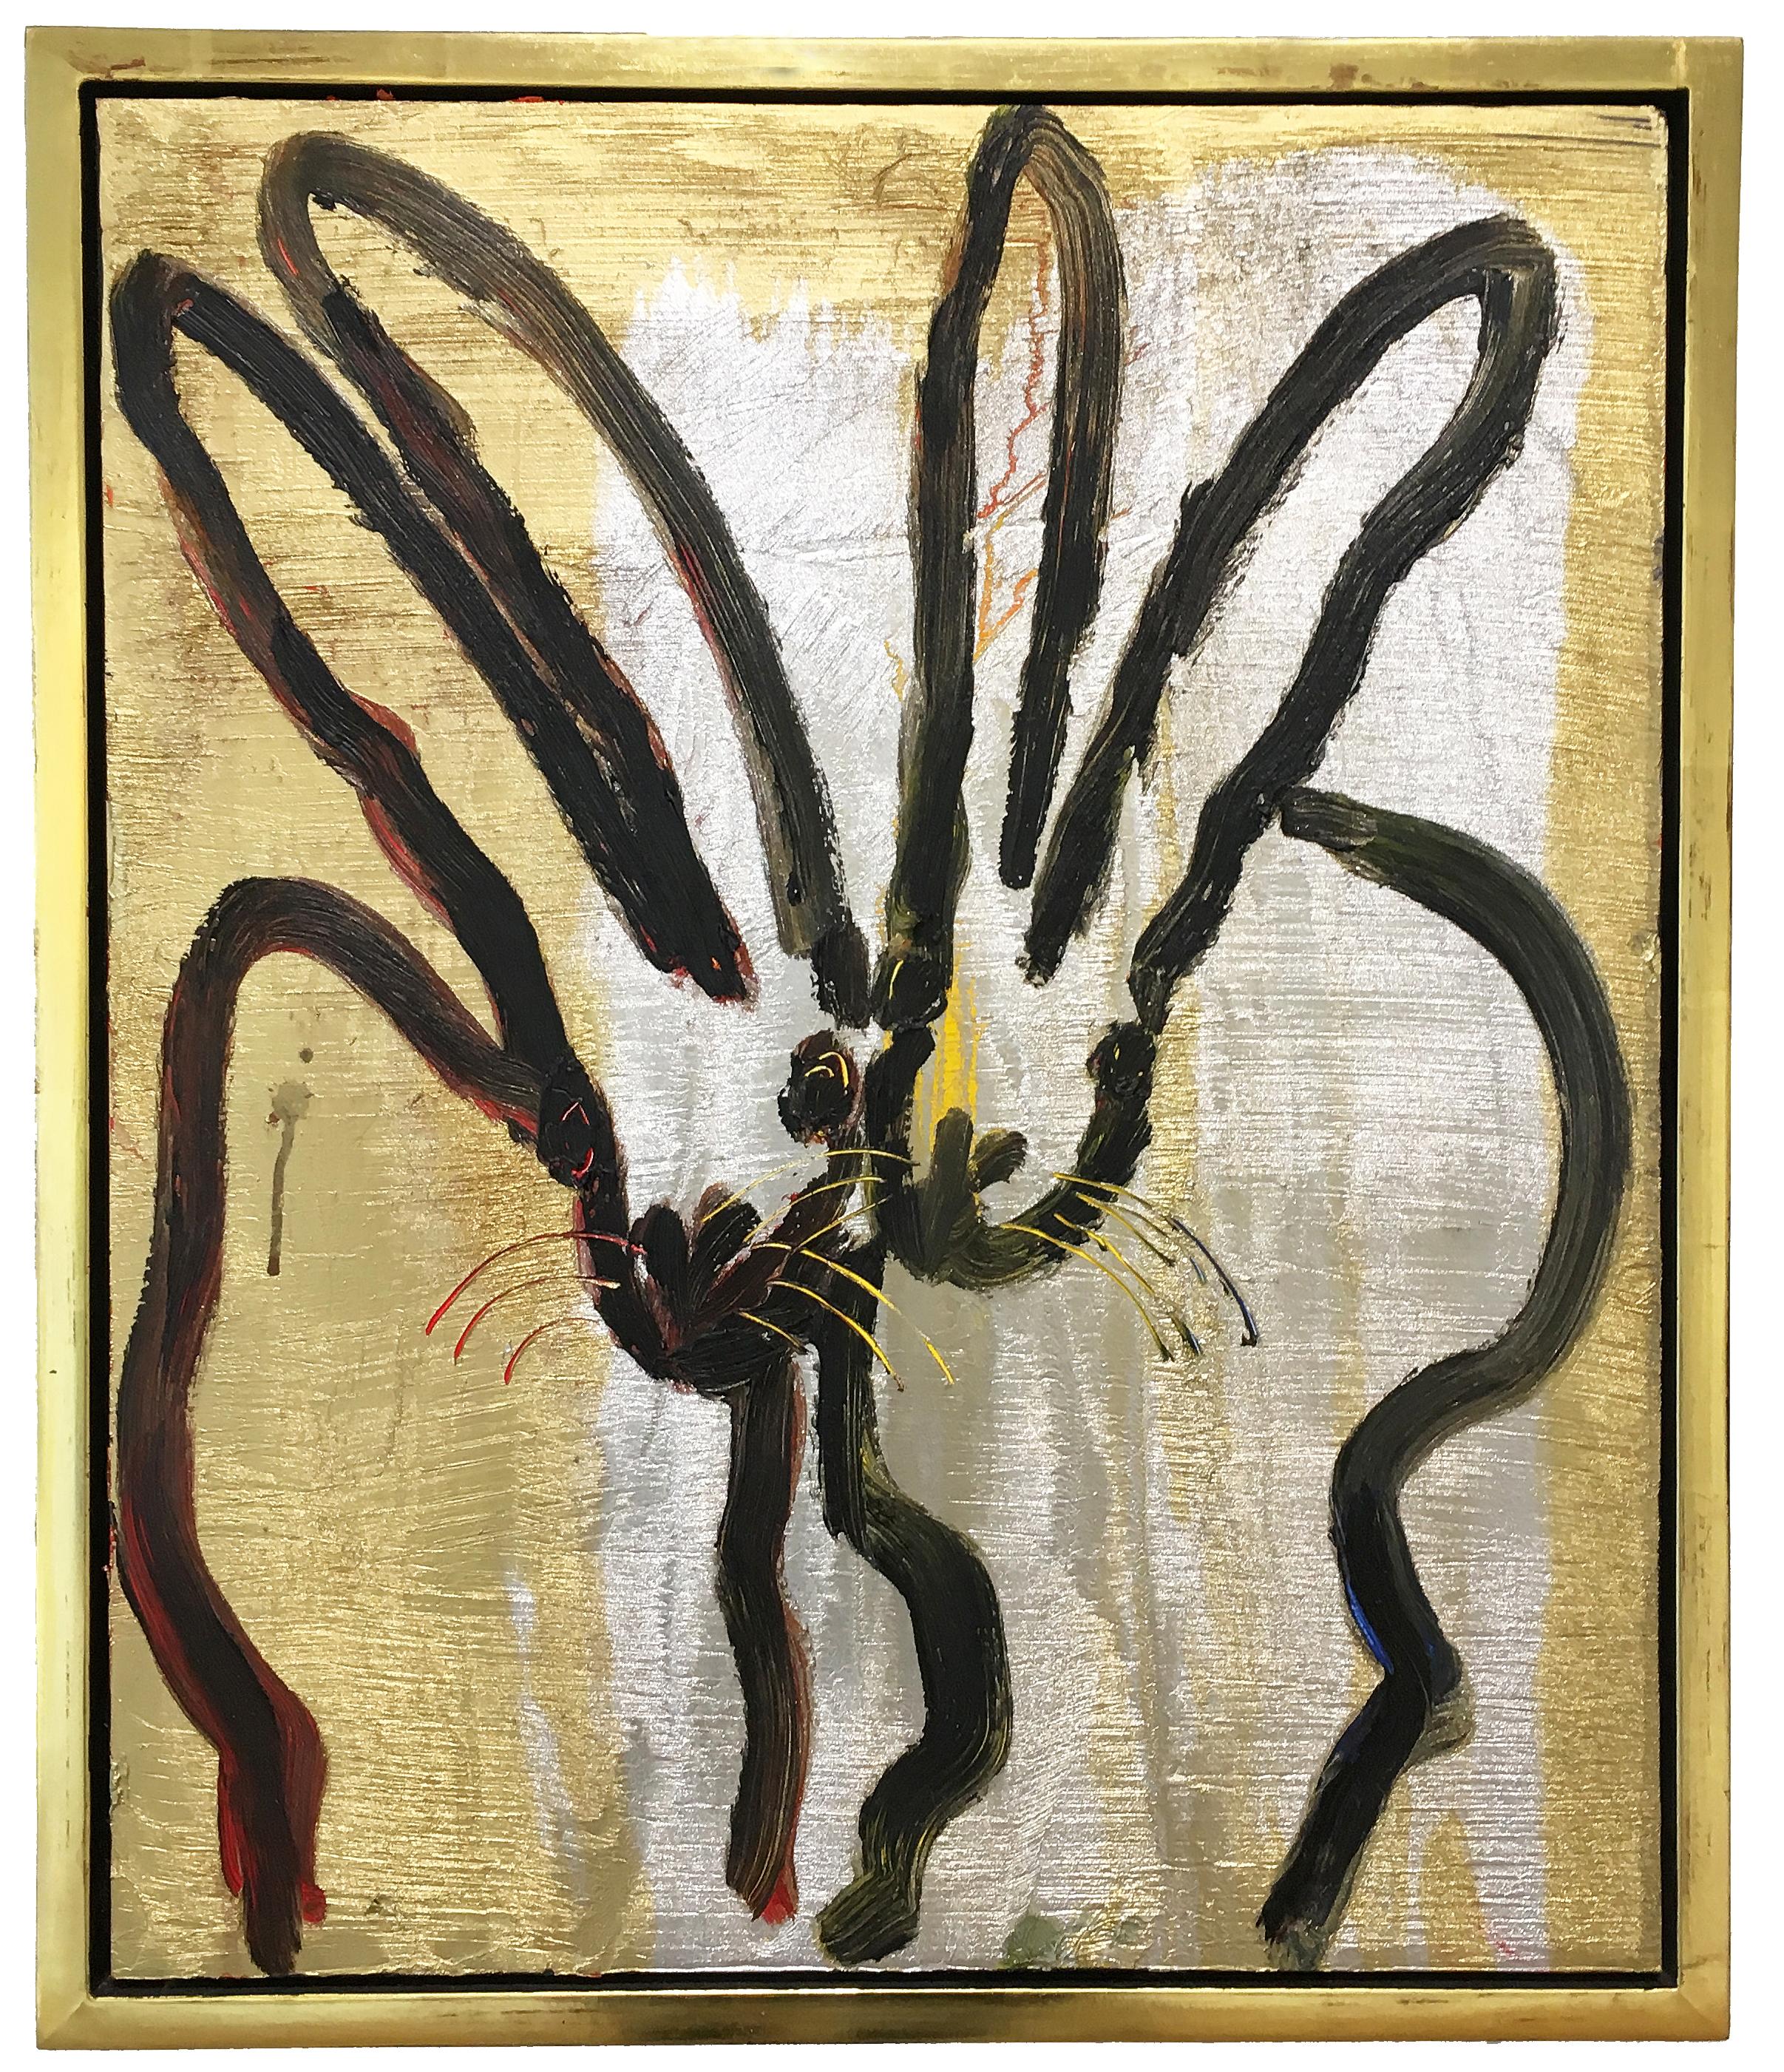 'The Kiss 2' 2019 by renowned New York City artist, Hunt Slonem. Oil on wood, 24 x 20 in. / Frame: 26 x 22 in. This painting features a charming portrait of two bunnies. The artist's ongoing experimentation with unconventional methodologies provide